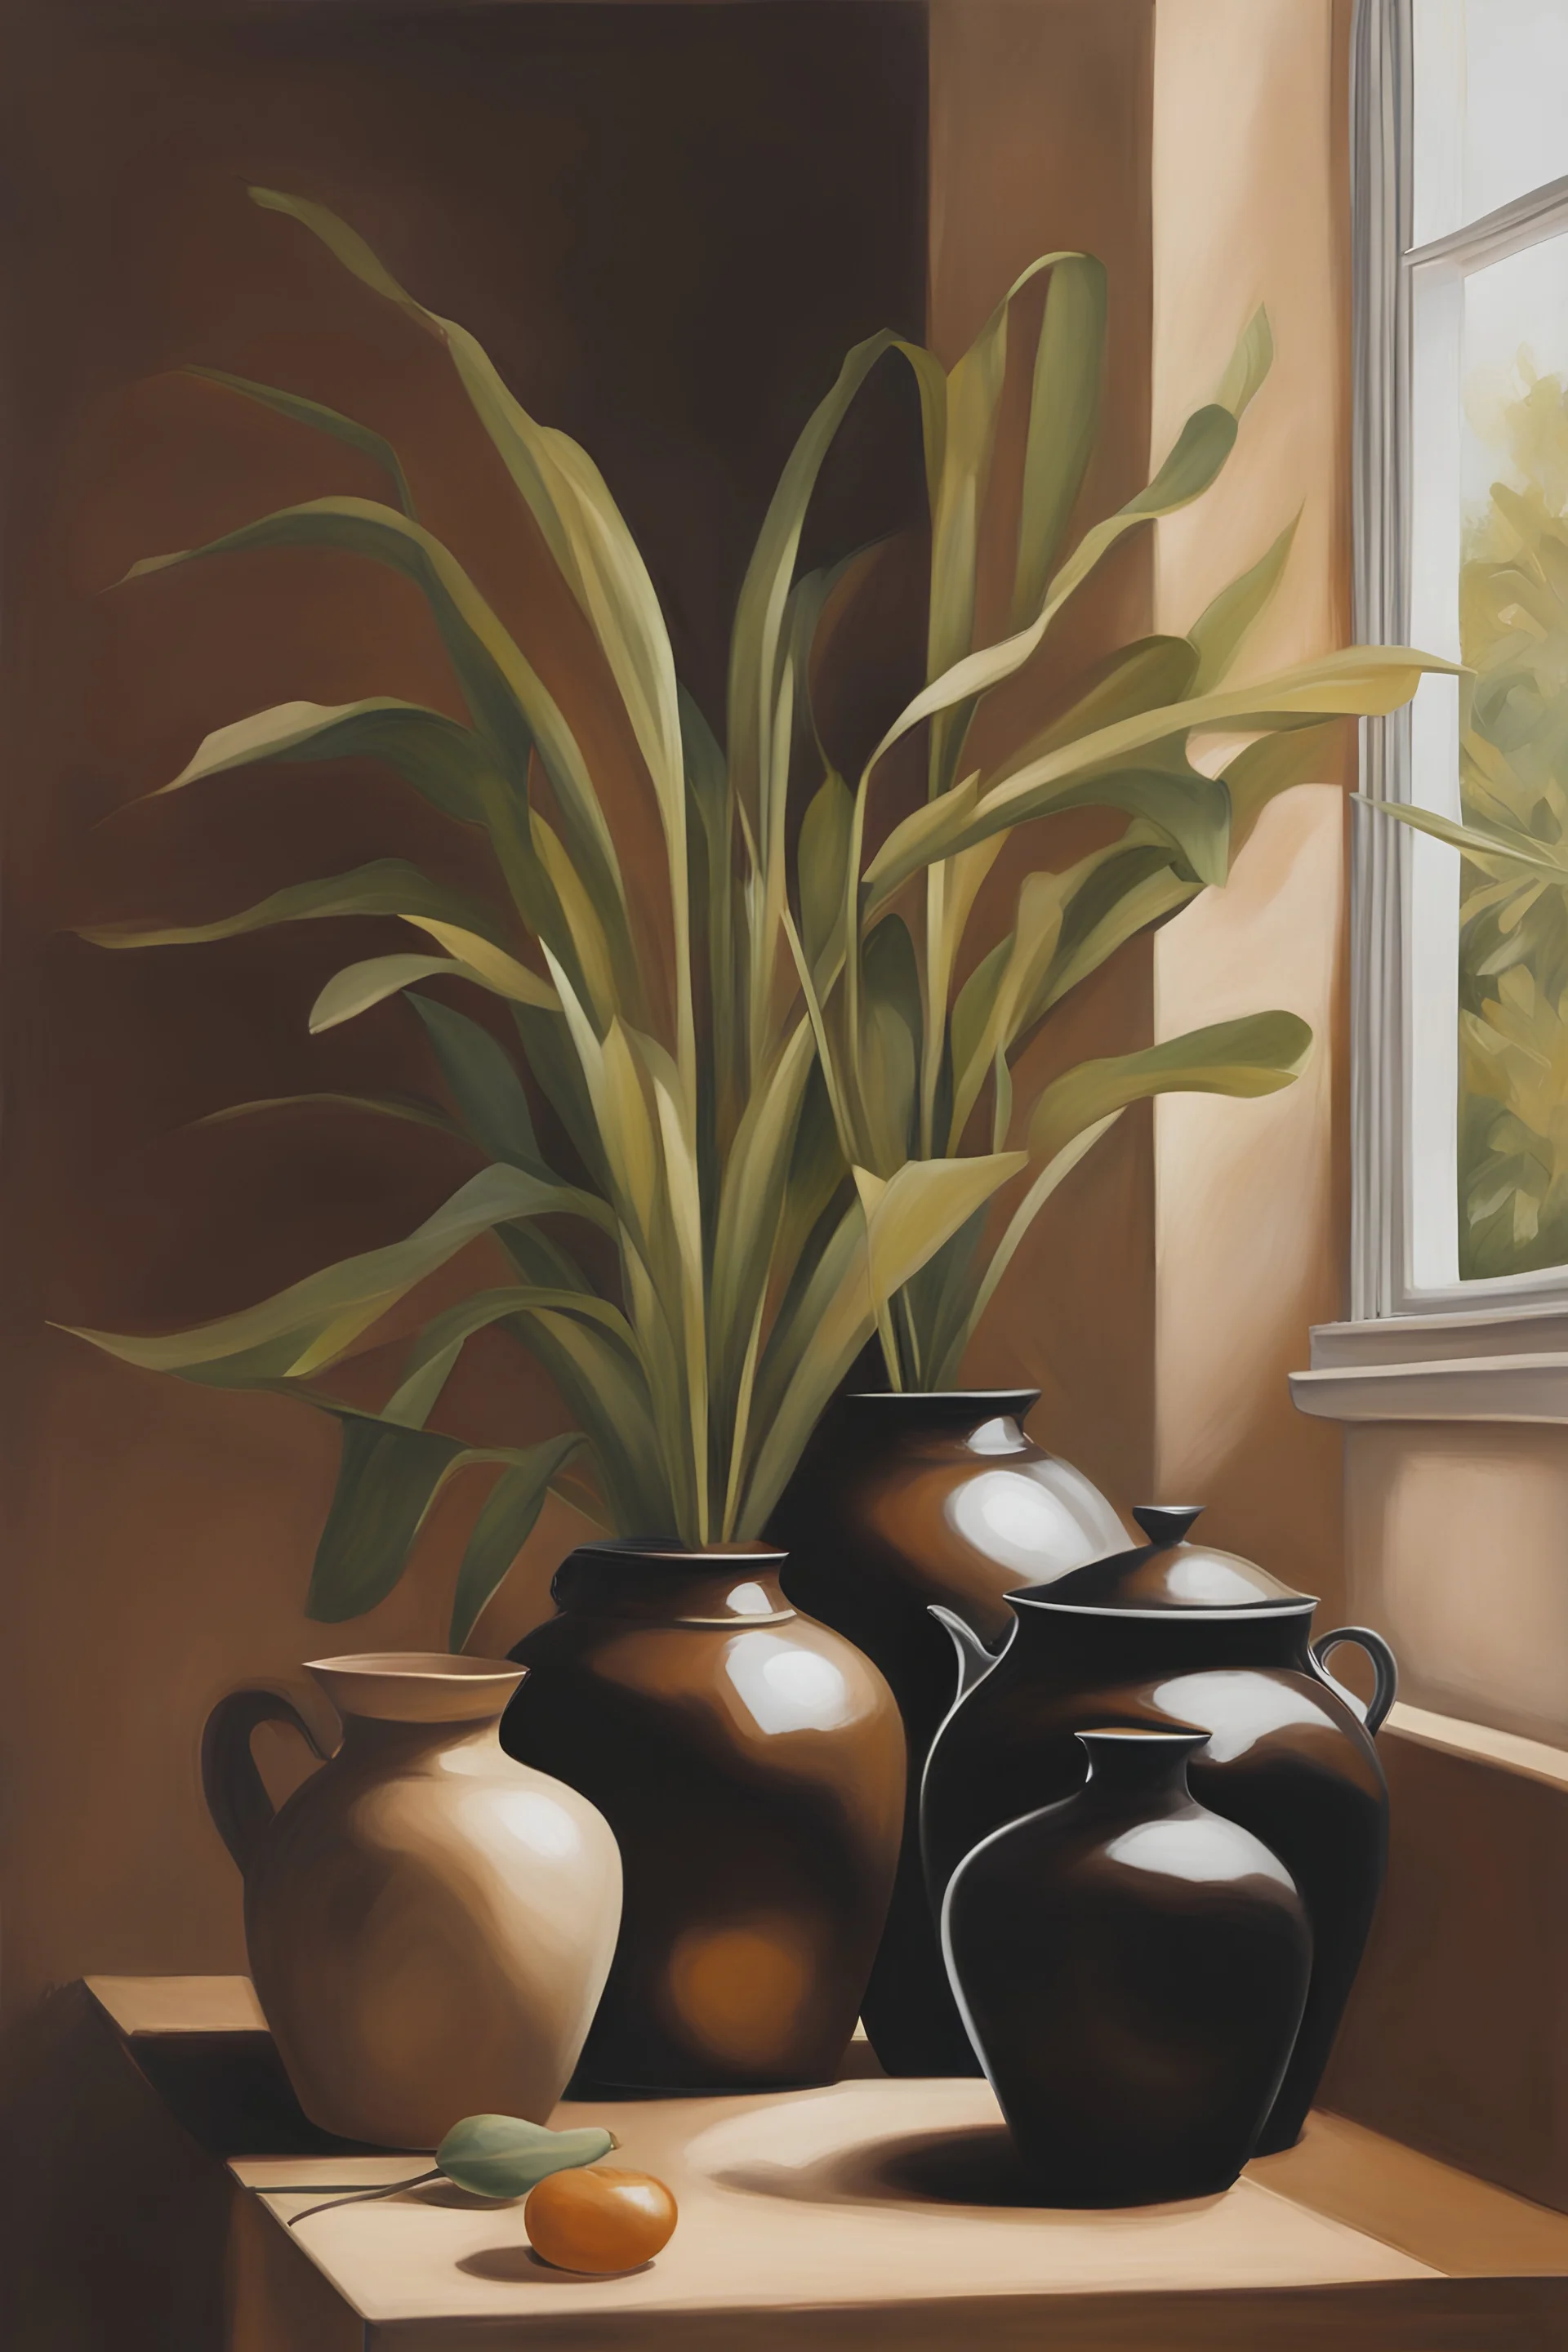 realistic monochromatic paintings of pots, brown colors, Brushstroke driven style of Impressionism with realistic subject matter